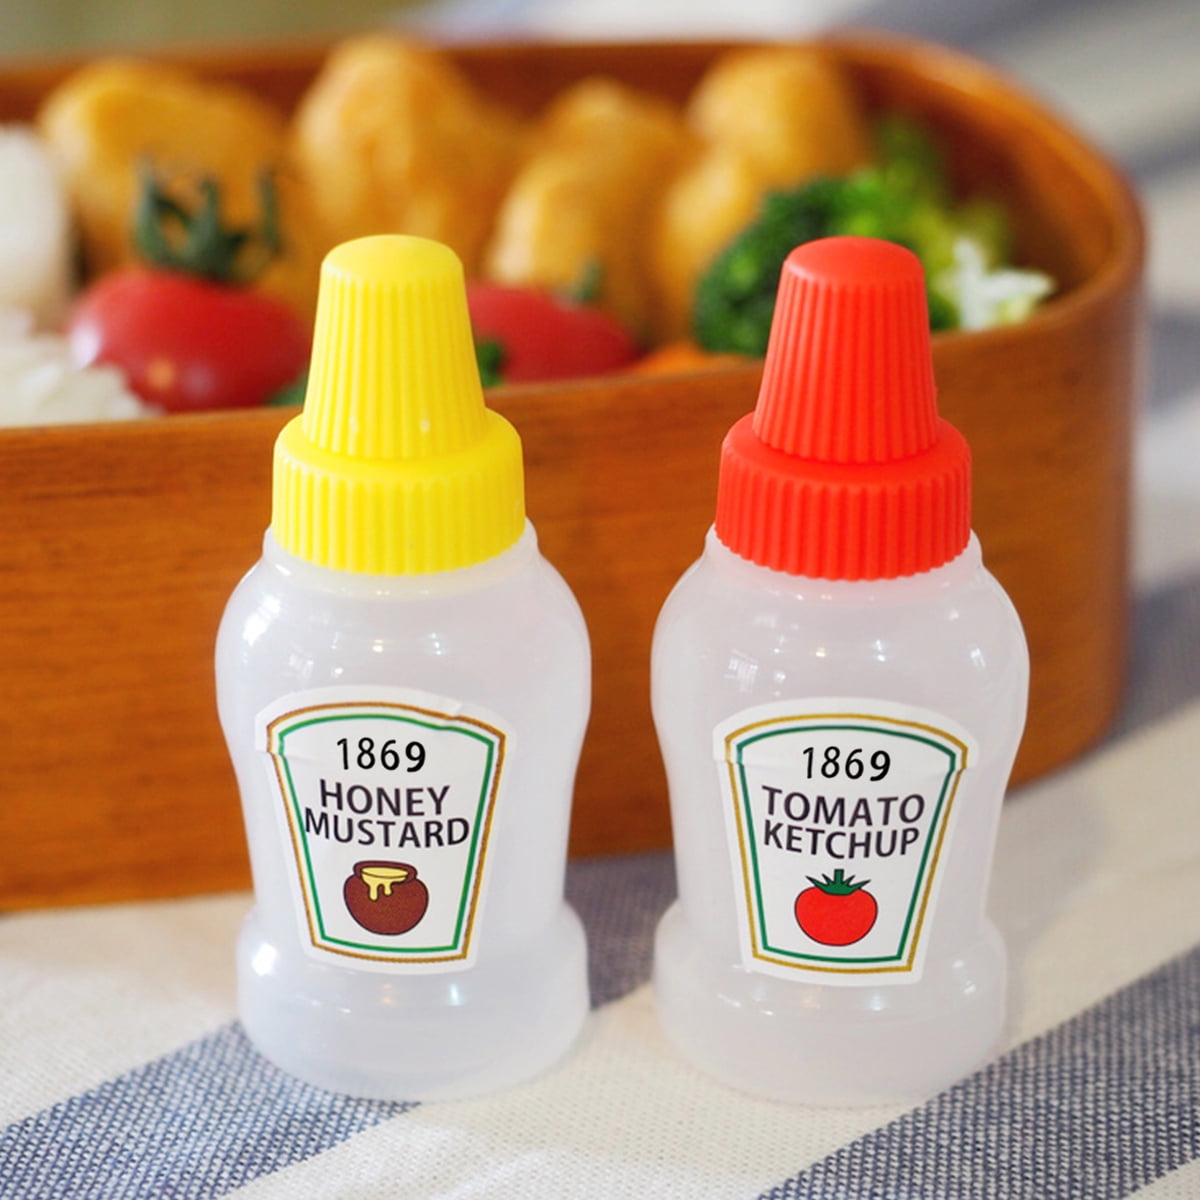 WXOIEOD 4 Pieces Mini Condiment Bottles, 30ml Samll Ketchup and Mustard  Bottle, Tiny Condiment Squee…See more WXOIEOD 4 Pieces Mini Condiment  Bottles